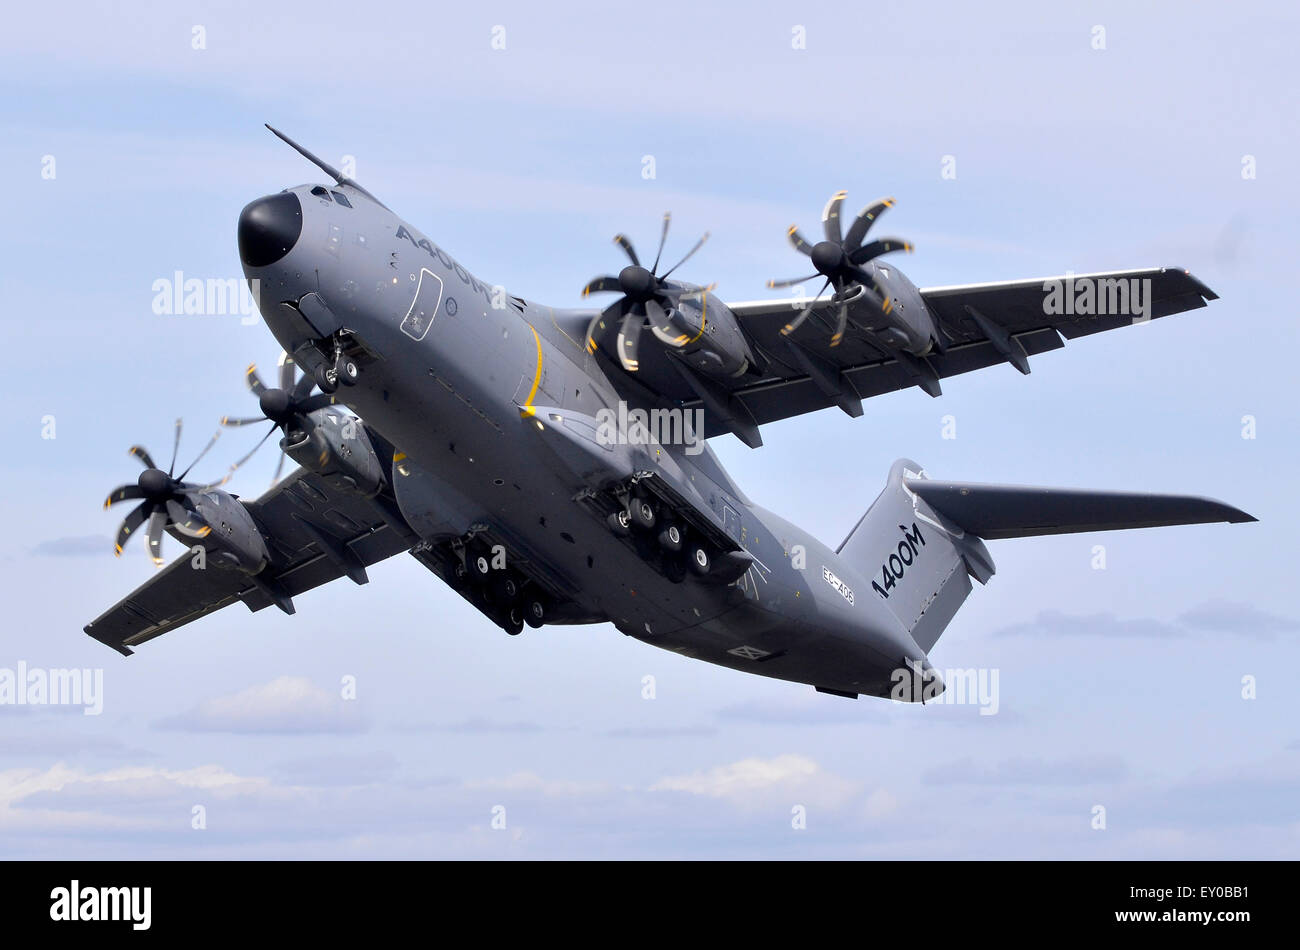 Airbus A400M making a dramatic take-off at RIAT 2015, Fairford, UK. Credit:  Antony Nettle/Alamy Live News Stock Photo